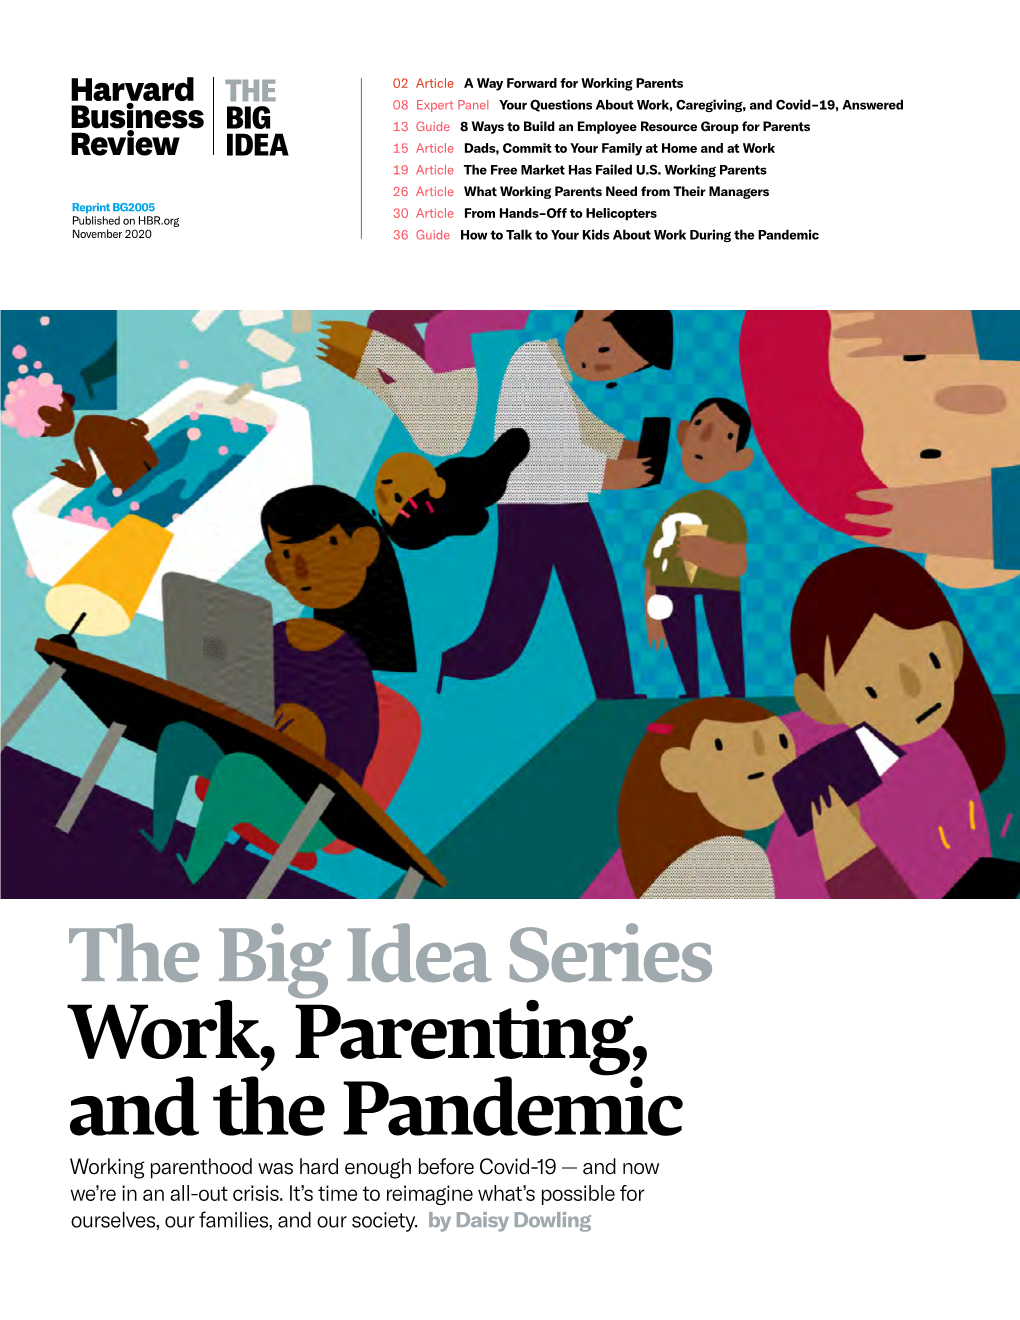 The Big Idea Series Work, Parenting, and the Pandemic Working Parenthood Was Hard Enough Before Covid-19 — and Now We’Re in an All-Out Crisis